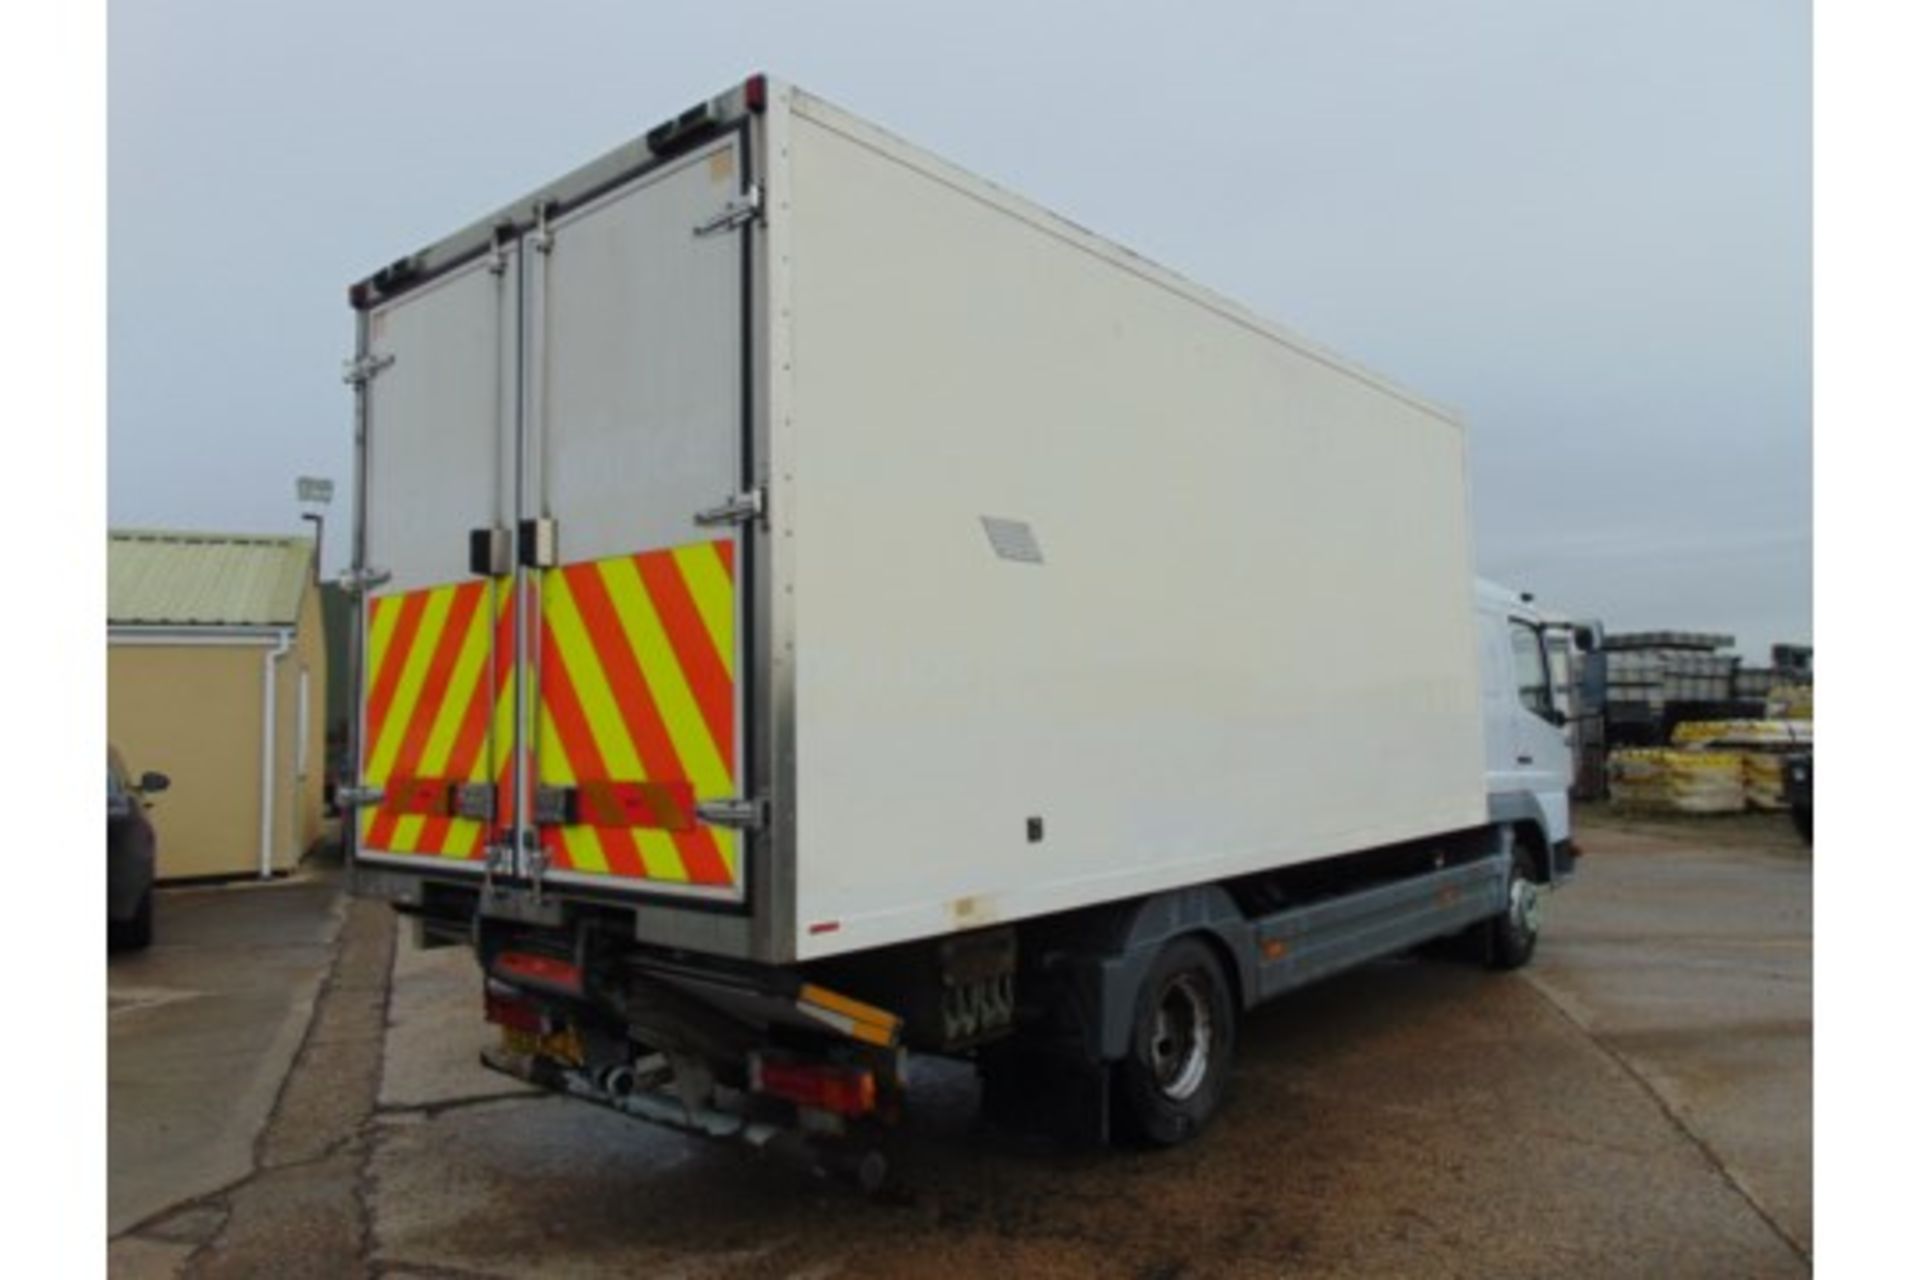 2001 Mercedes Benz Atego 1018 Box Truck C/W Tail Lift - Image 7 of 21